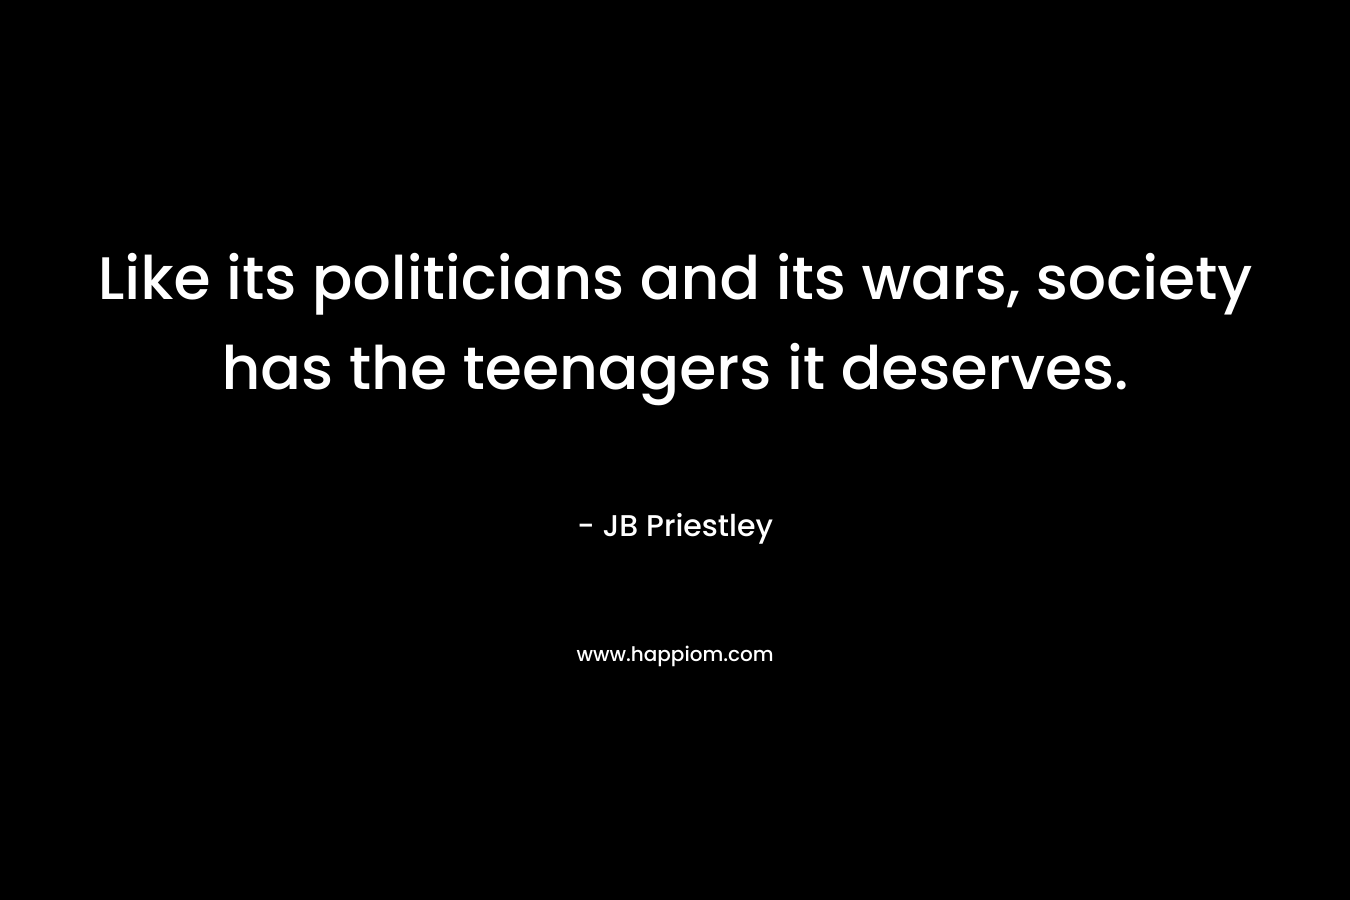 Like its politicians and its wars, society has the teenagers it deserves.